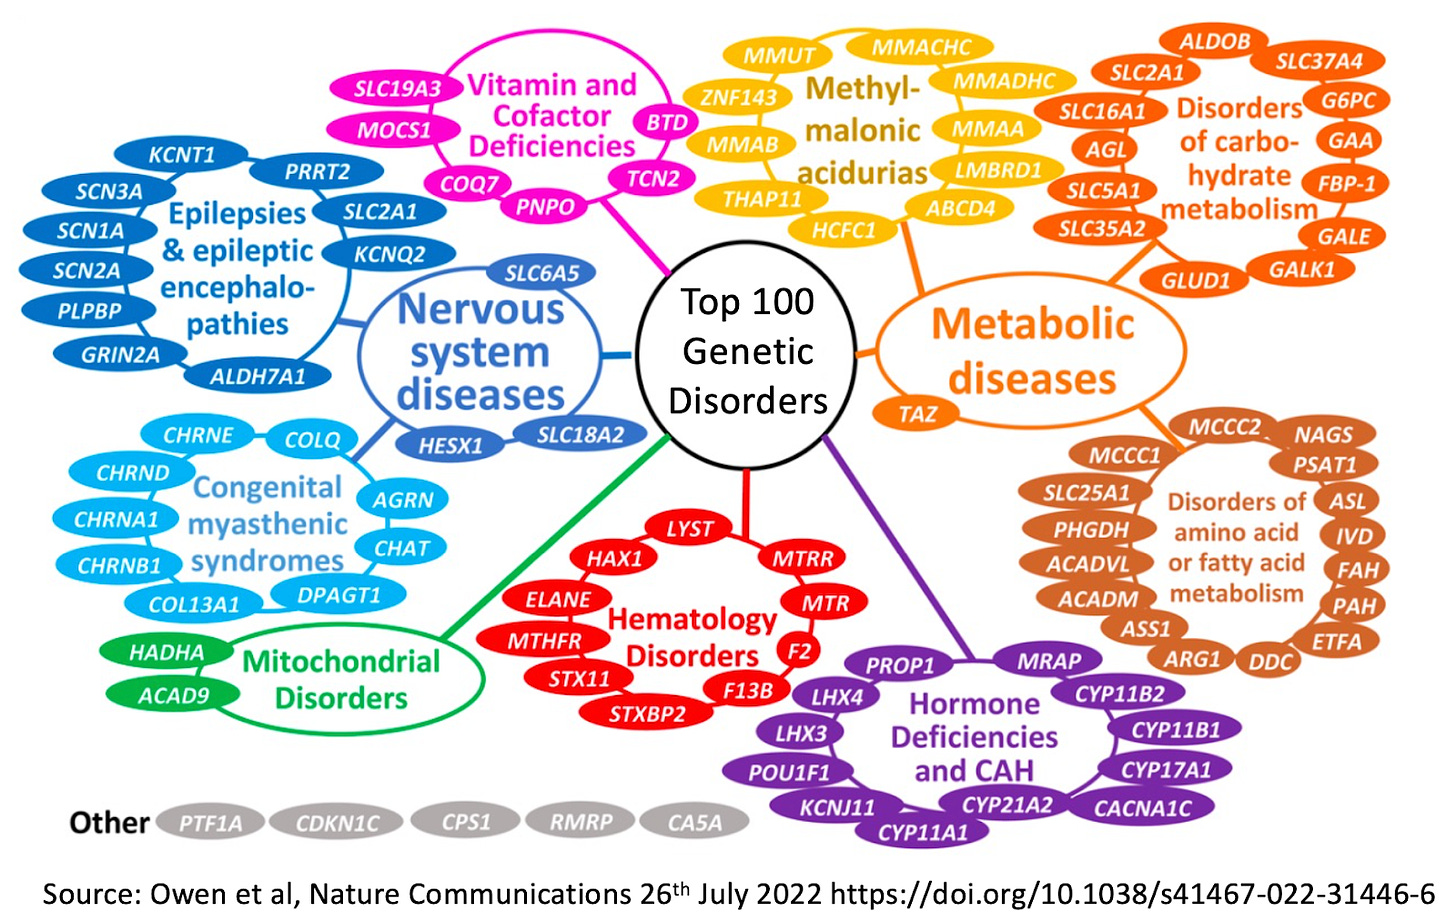 The top 100 genetic disorders and the genes affected, grouped by type. Types include vitamin and cofactor deficiencies (6); metabolic diseases (40), including methylmalonic acidurias (10), disorders of carbohydrate metabolism (13),  disorders of amino acid or fatty acid metabolism (16); hormone deficiencies and CAH (12); hematology disorders (10), mitochondrial disorders (2);  nervous system diseases (22), including congenital myasthenic syndromes (9) and epilepsies and epileptic encephalopathies (10); and others (5).